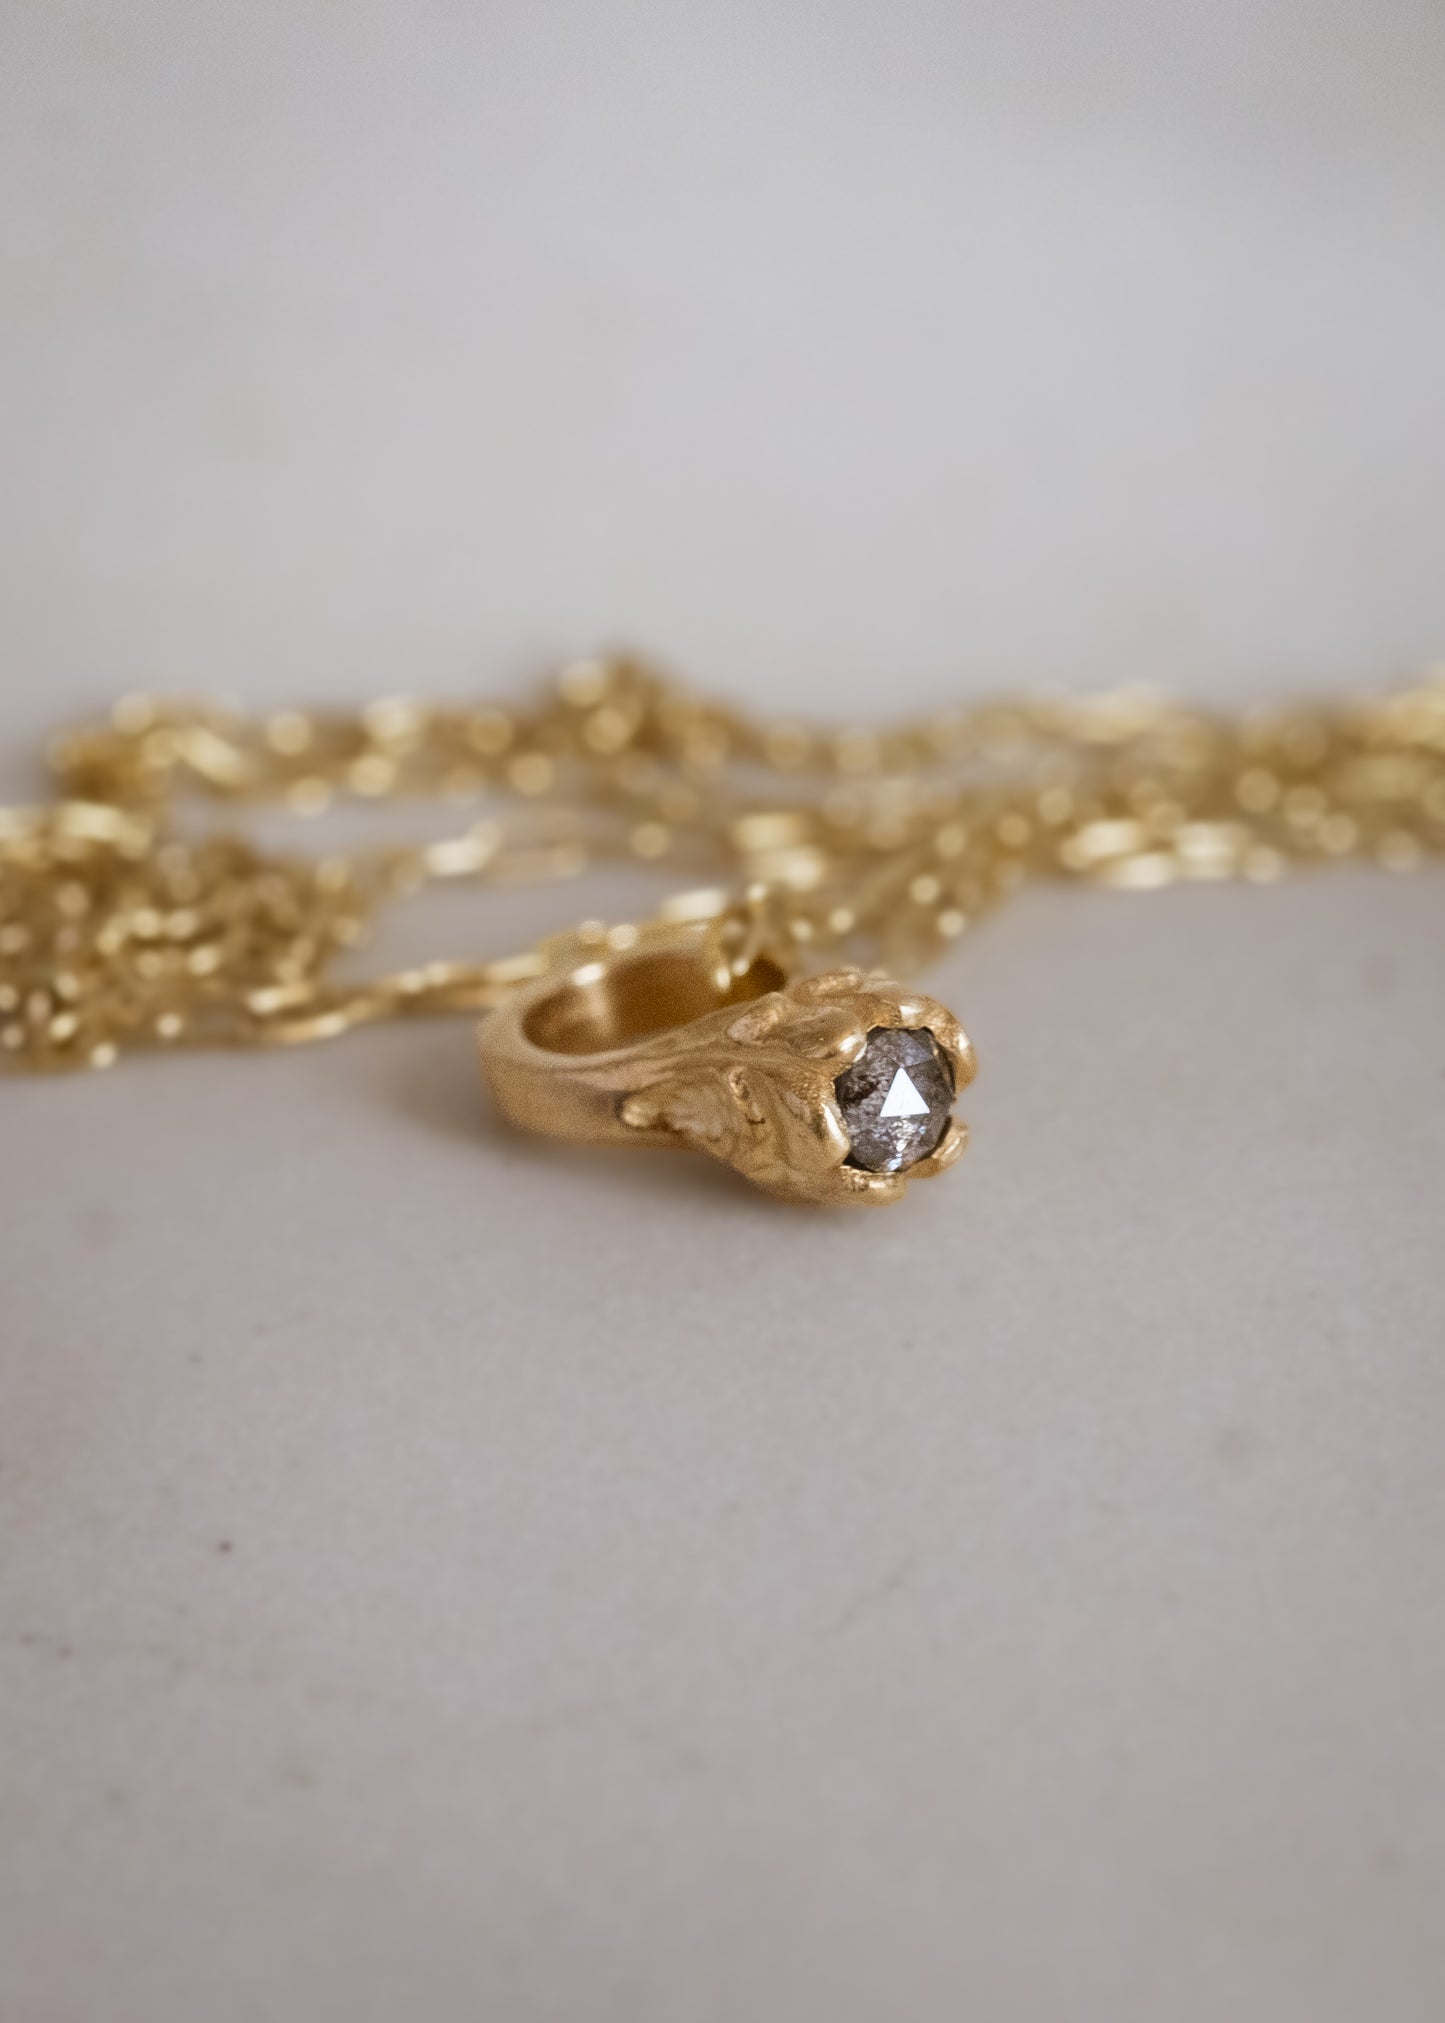 Inspired by a set of rings purchased for a childhood crush, the Babbey necklace captures the magic of those innocent days, infused now with refined sophistication. Hand-crafted gold petals reveal a stunning diamond, creating a delicate ring-shaped pendant perfect for celebrating new motherhood, sisterhood, friendship—or the promise of love in bloom.